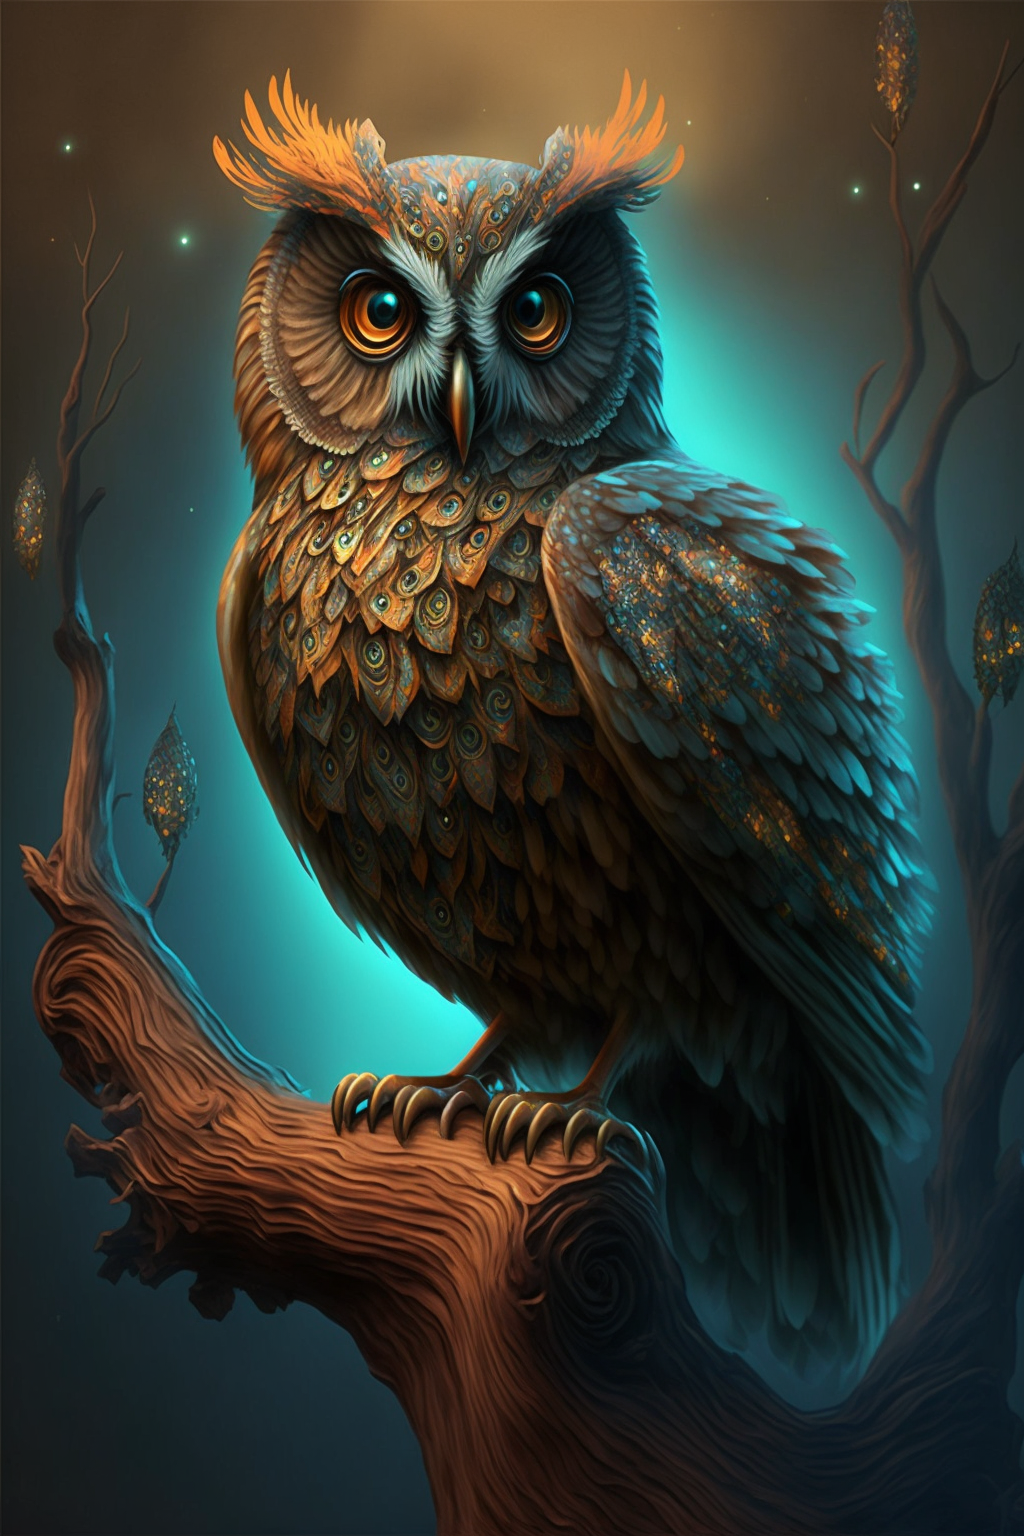 Owl in the style of Fantasy Surrealism 2